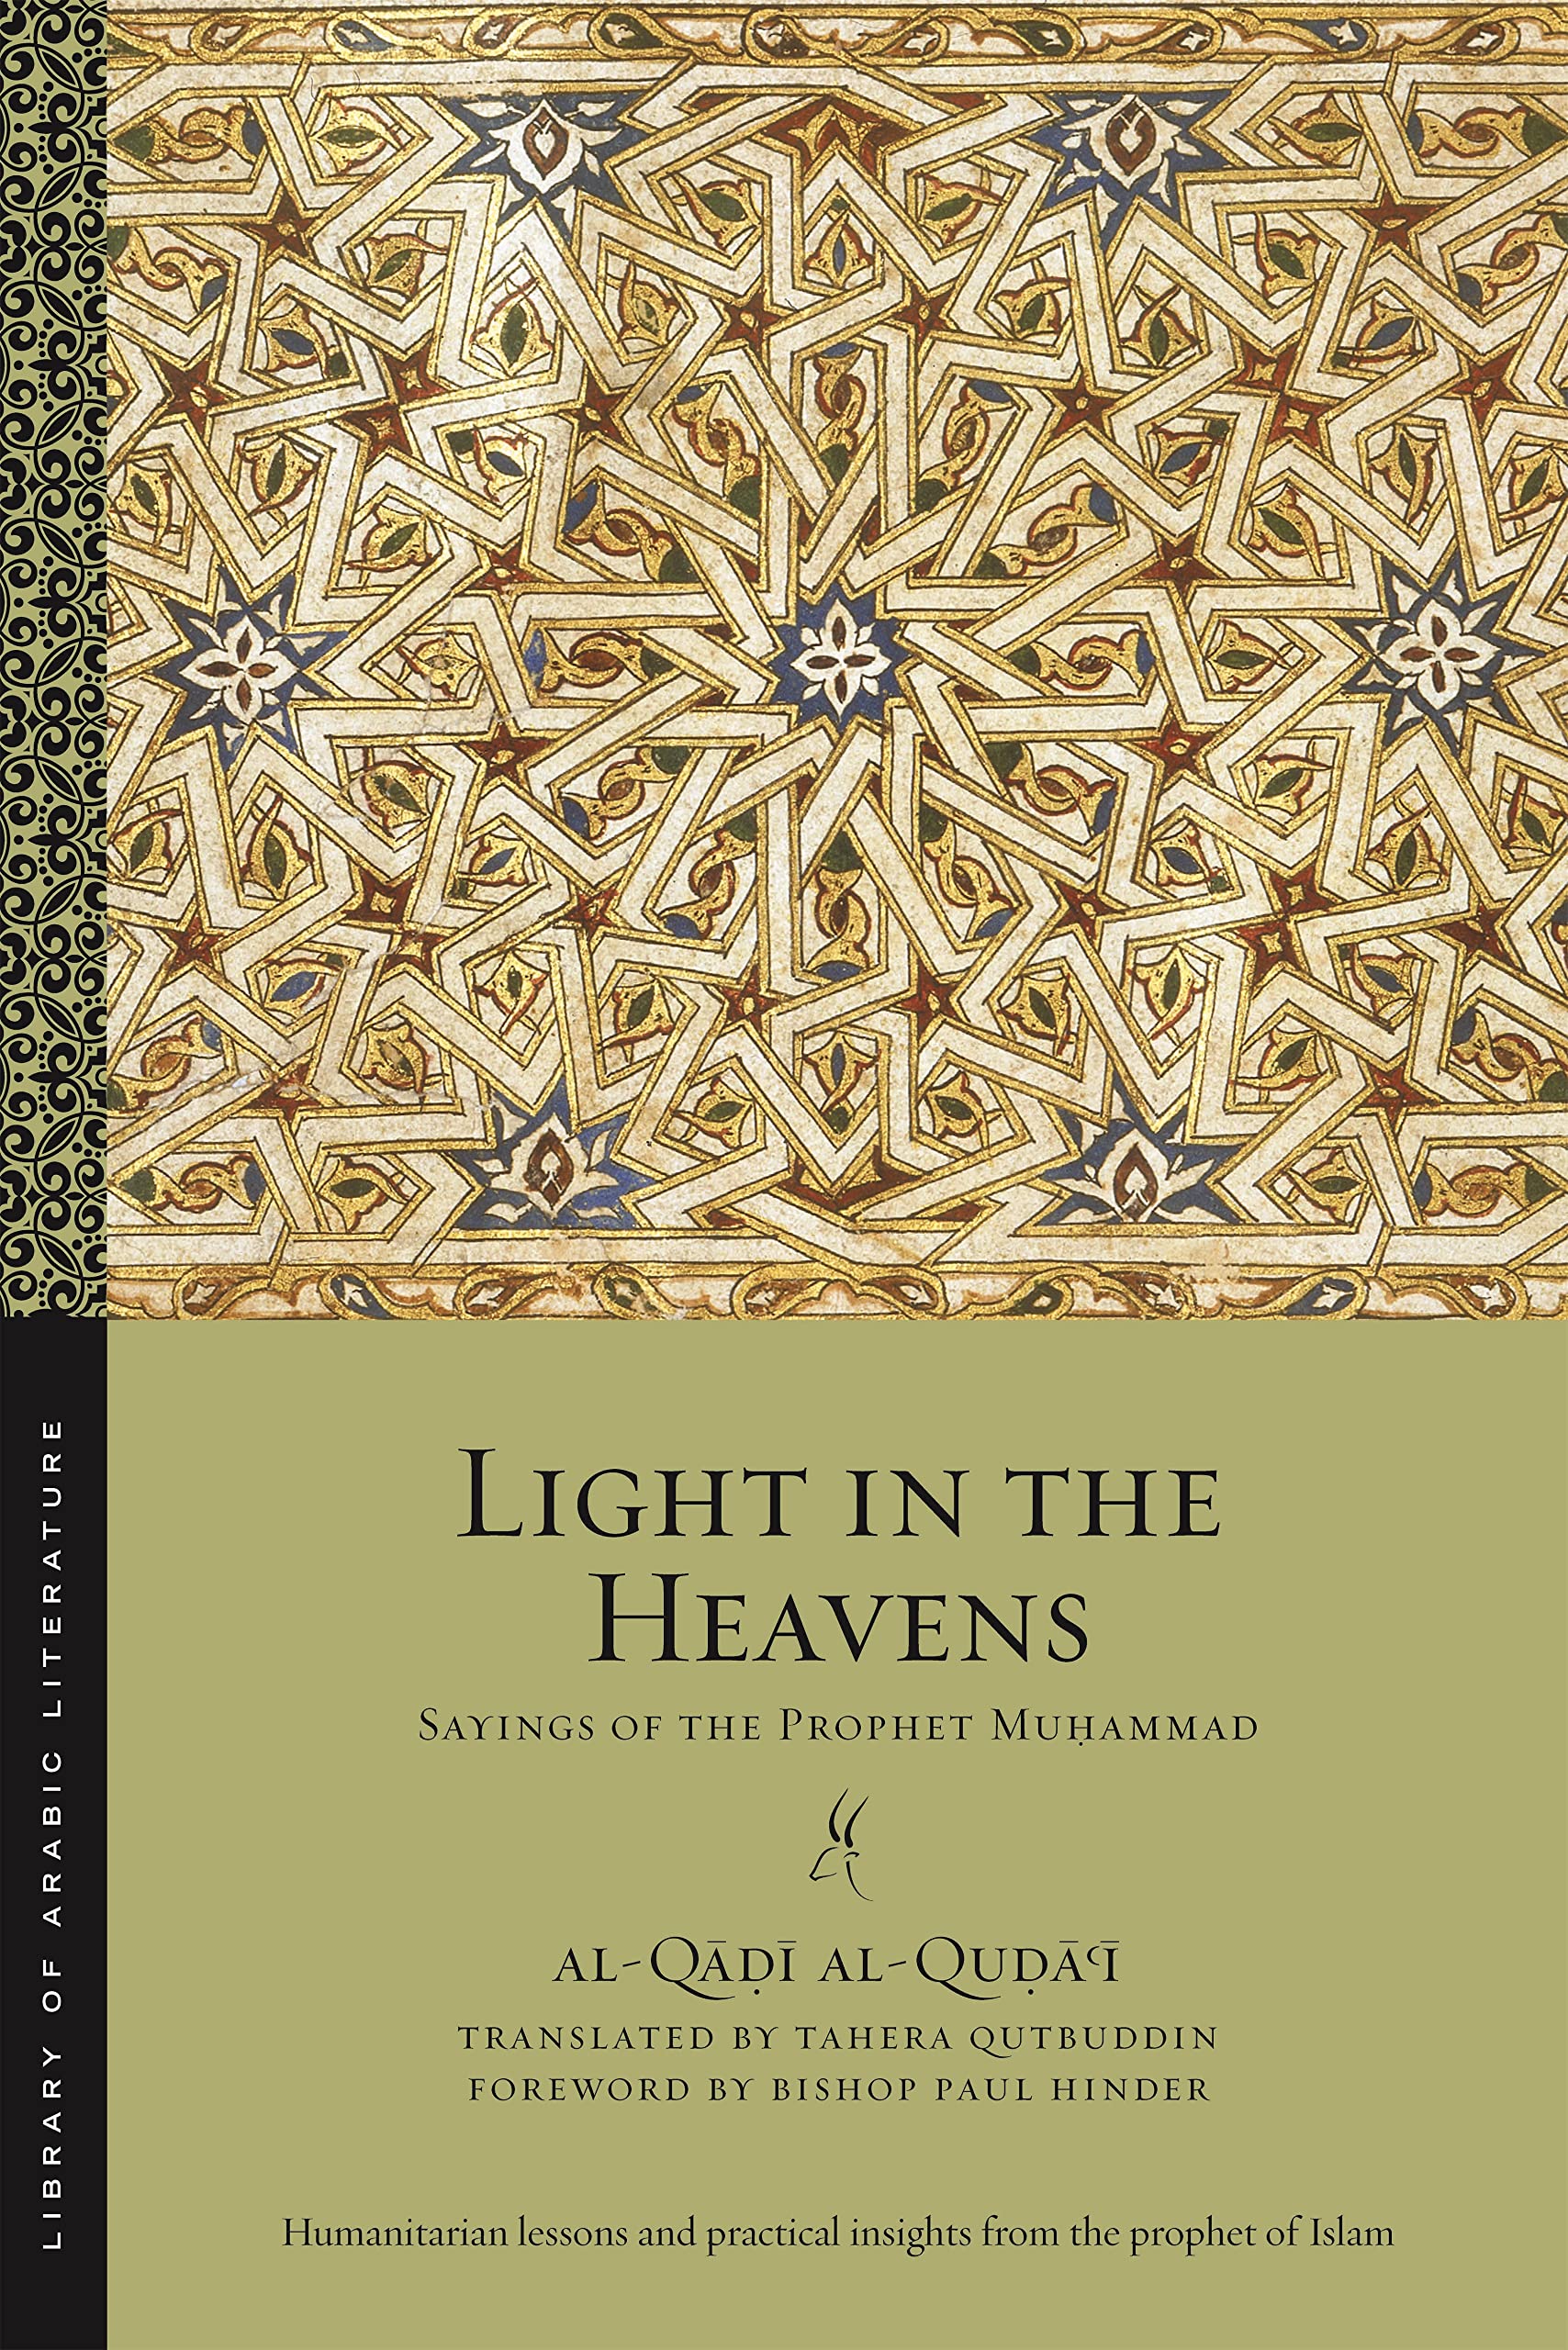 Light in the Heavens: Sayings of the Prophet Muhammad